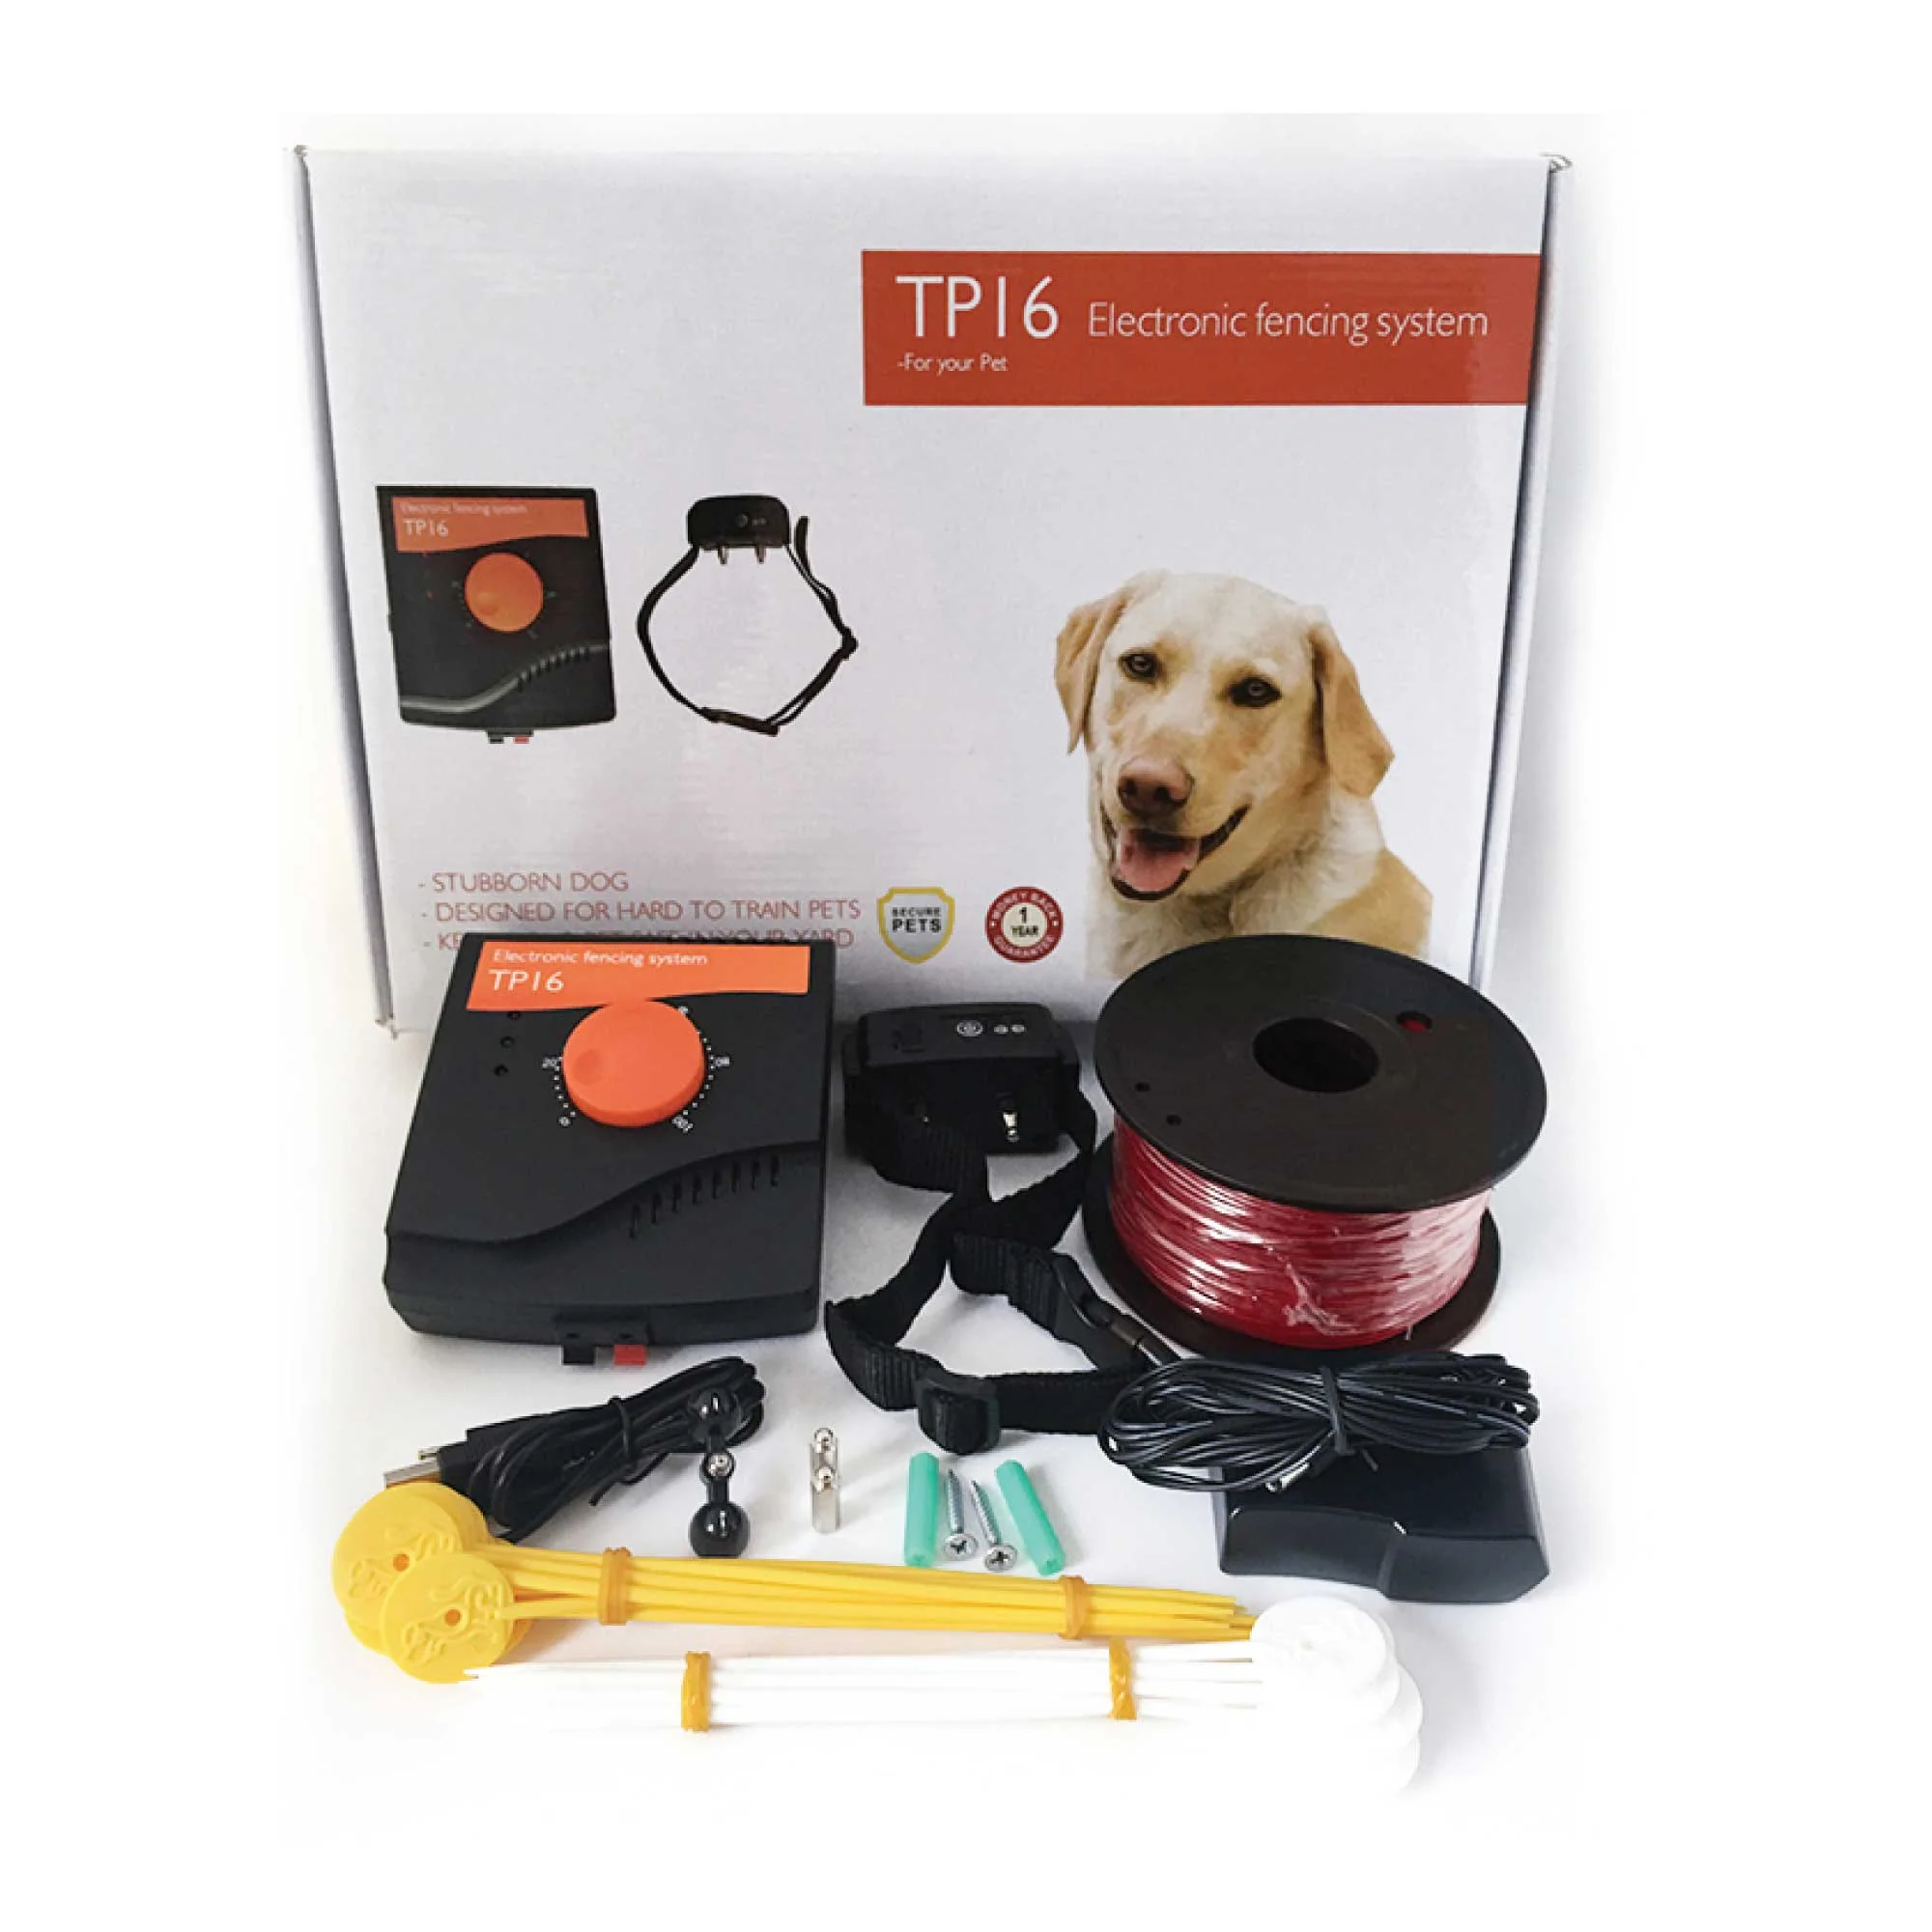 wireless pet containment system